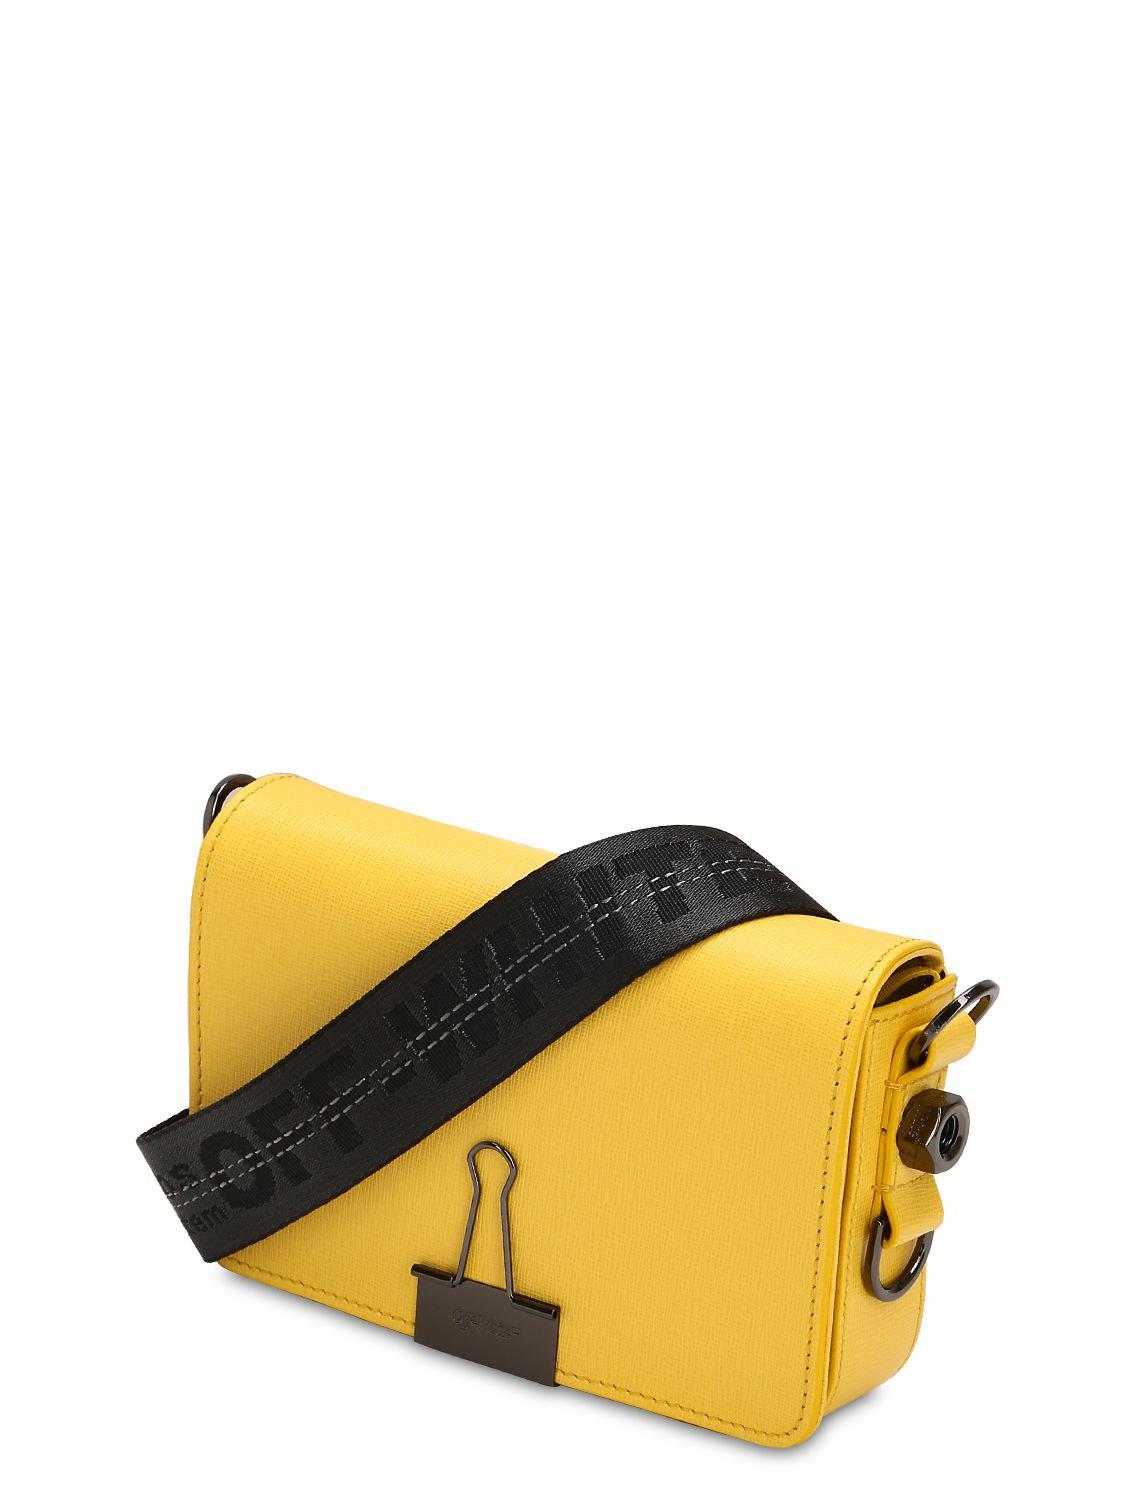 Off-White c/o Virgil Abloh Mini Binder Clip Saffiano Leather Bag in Yellow - Lyst